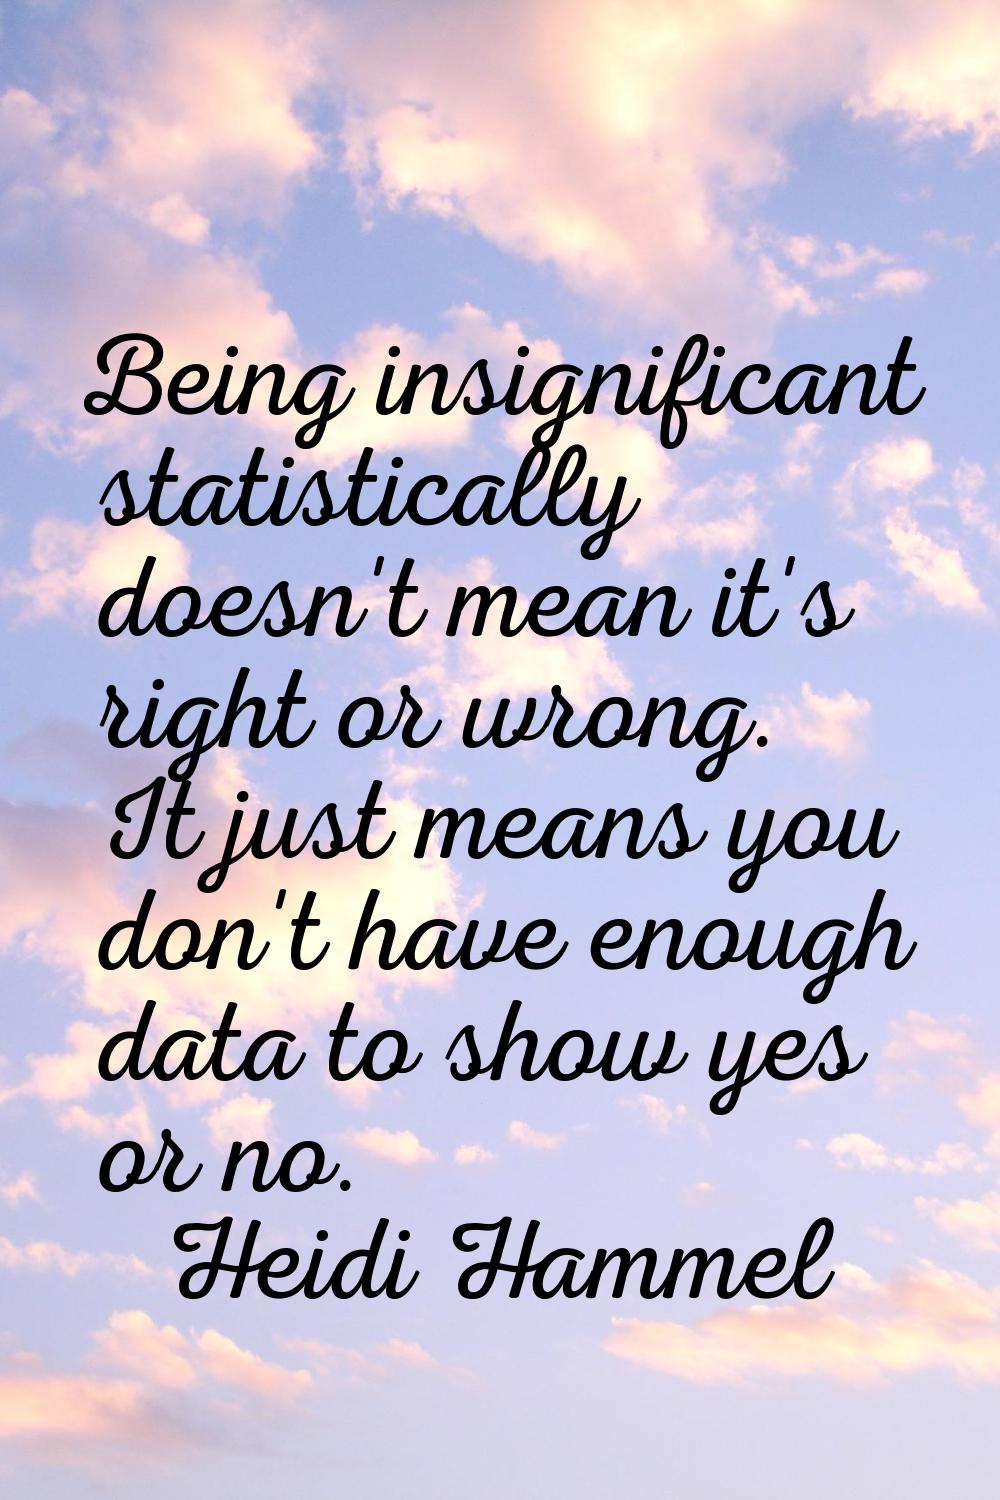 Being insignificant statistically doesn't mean it's right or wrong. It just means you don't have en